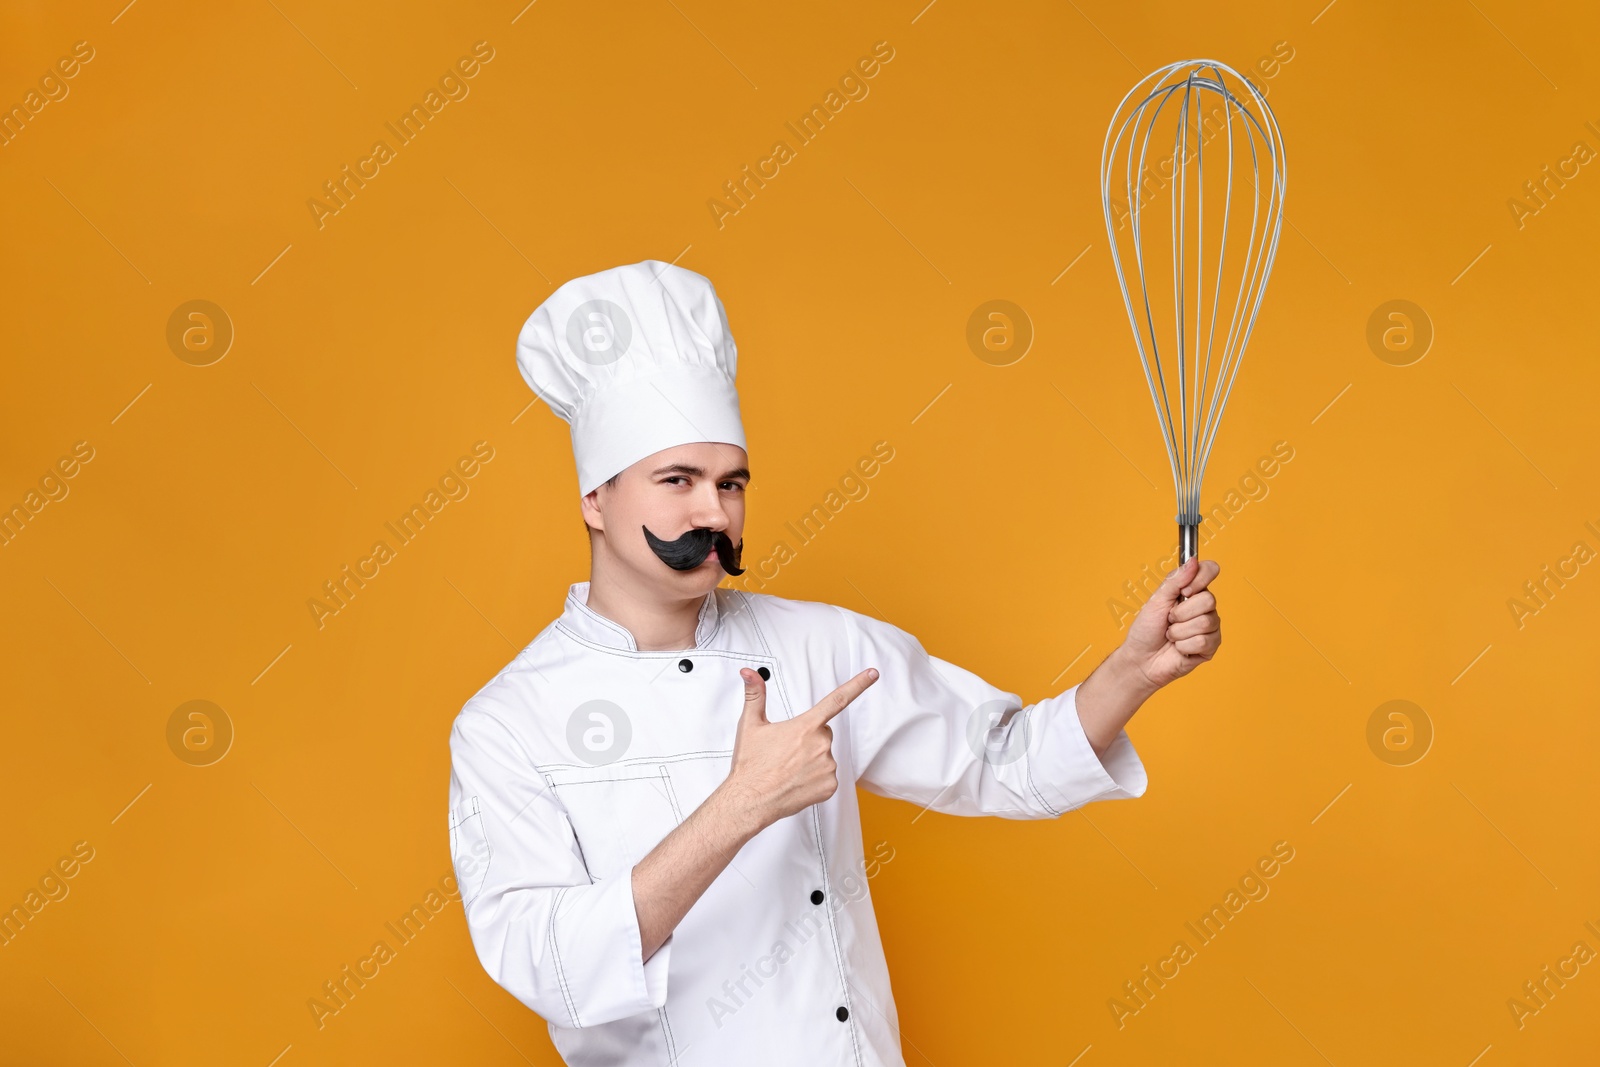 Image of Pastry chef with fake mustache pointing at big whisk on orange background